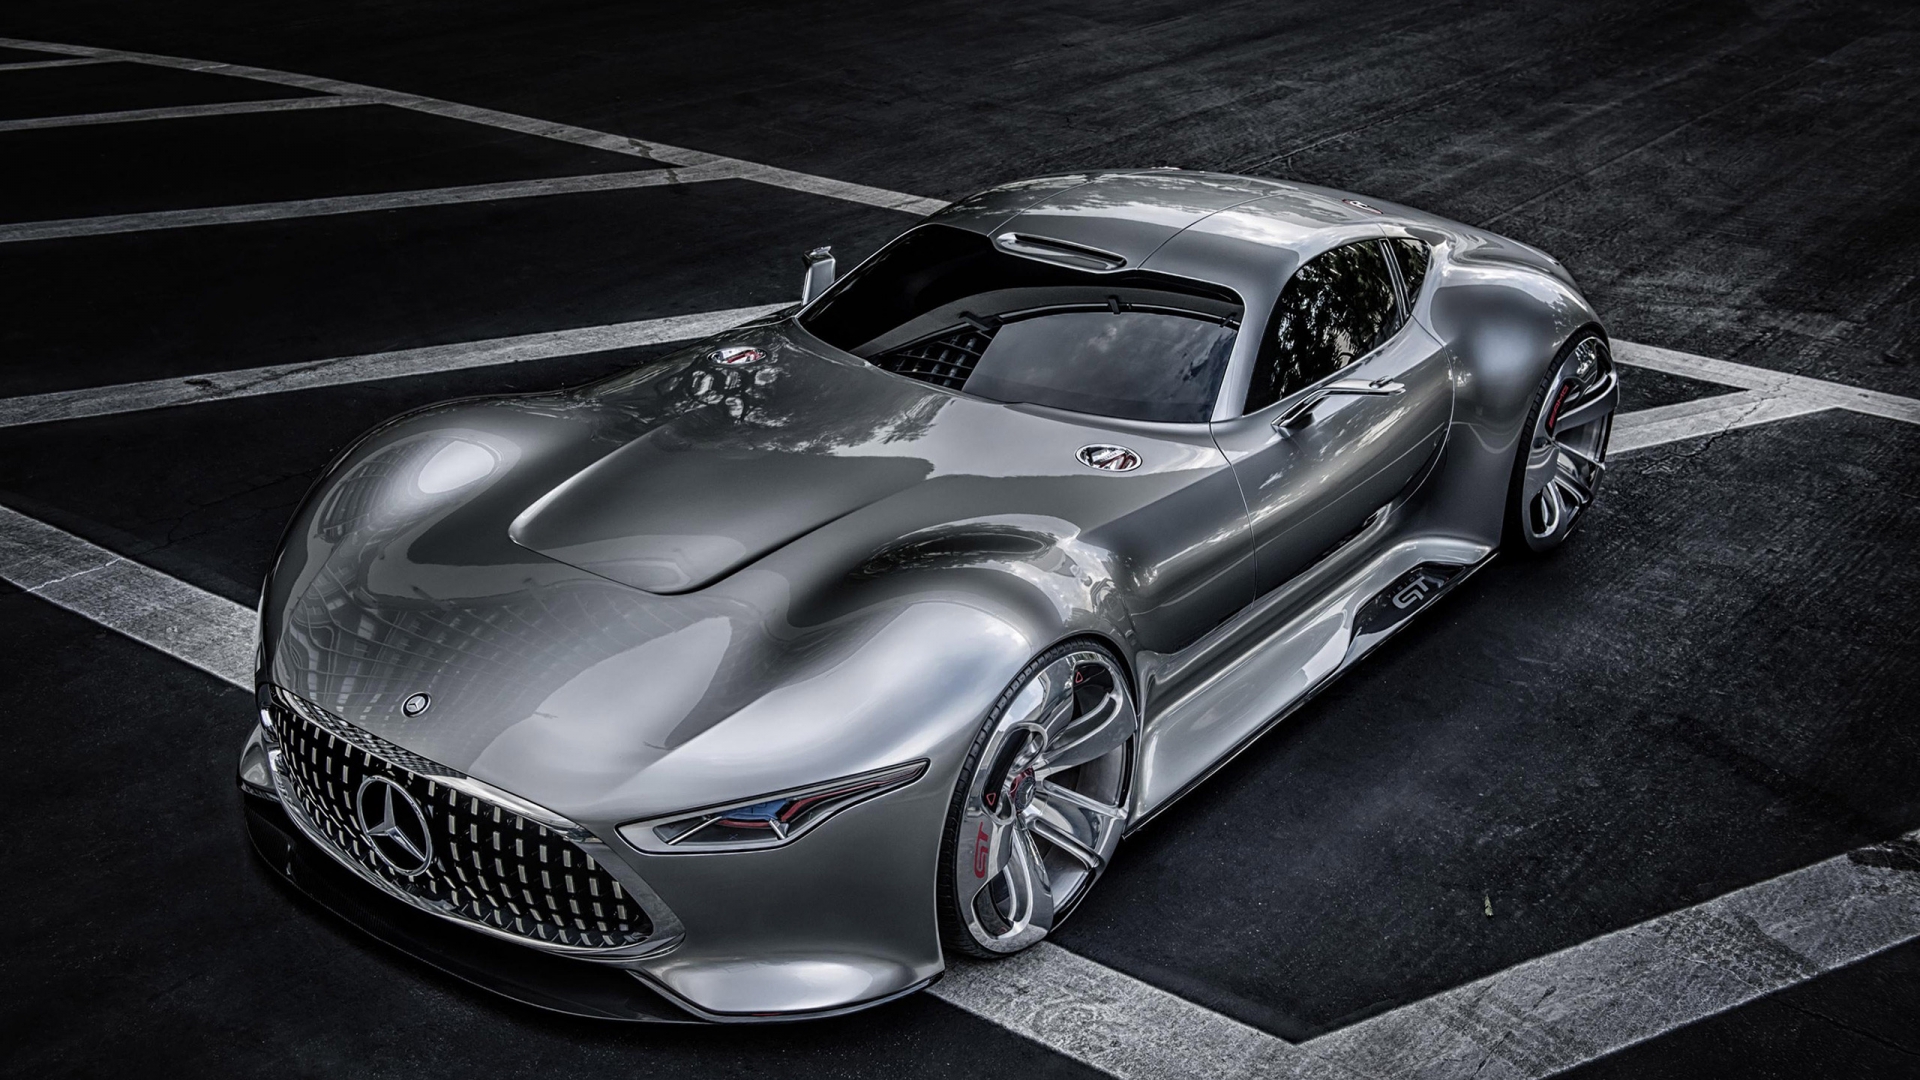 Mercedes Benz AMG Vision Gran Turismo for 1920 x 1080 HDTV 1080p resolution